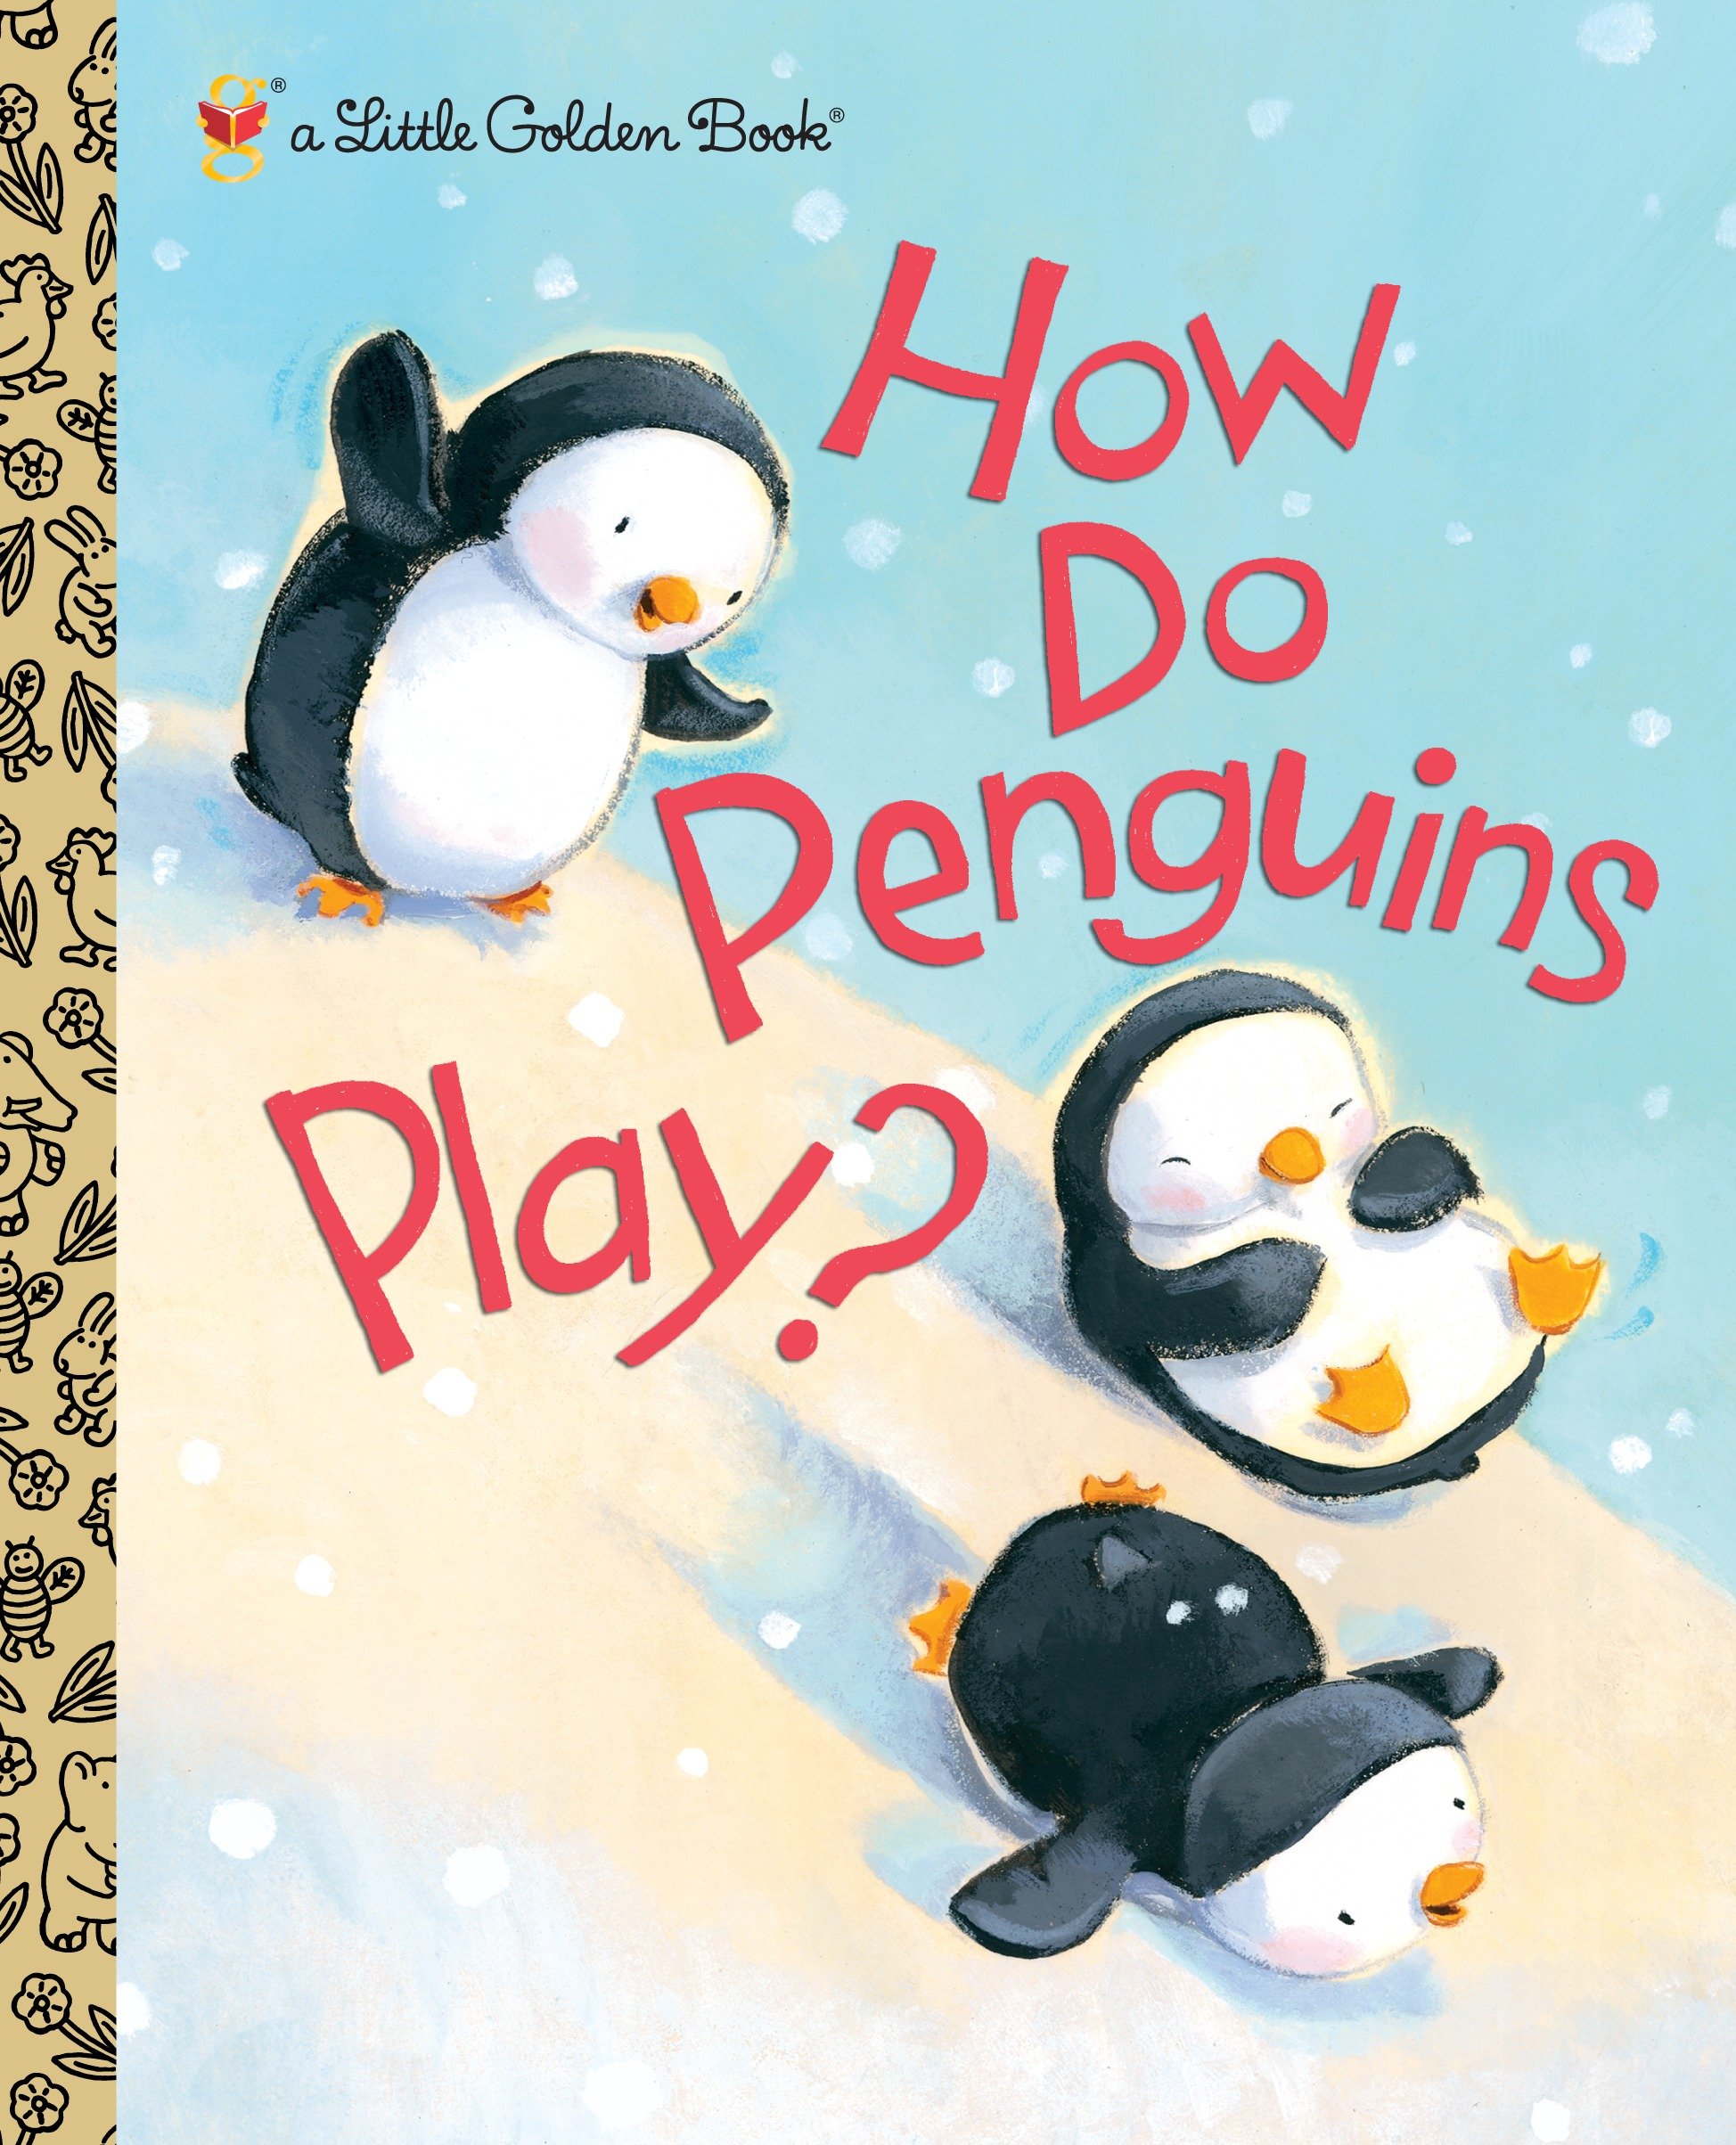 How do penguins play? cover image